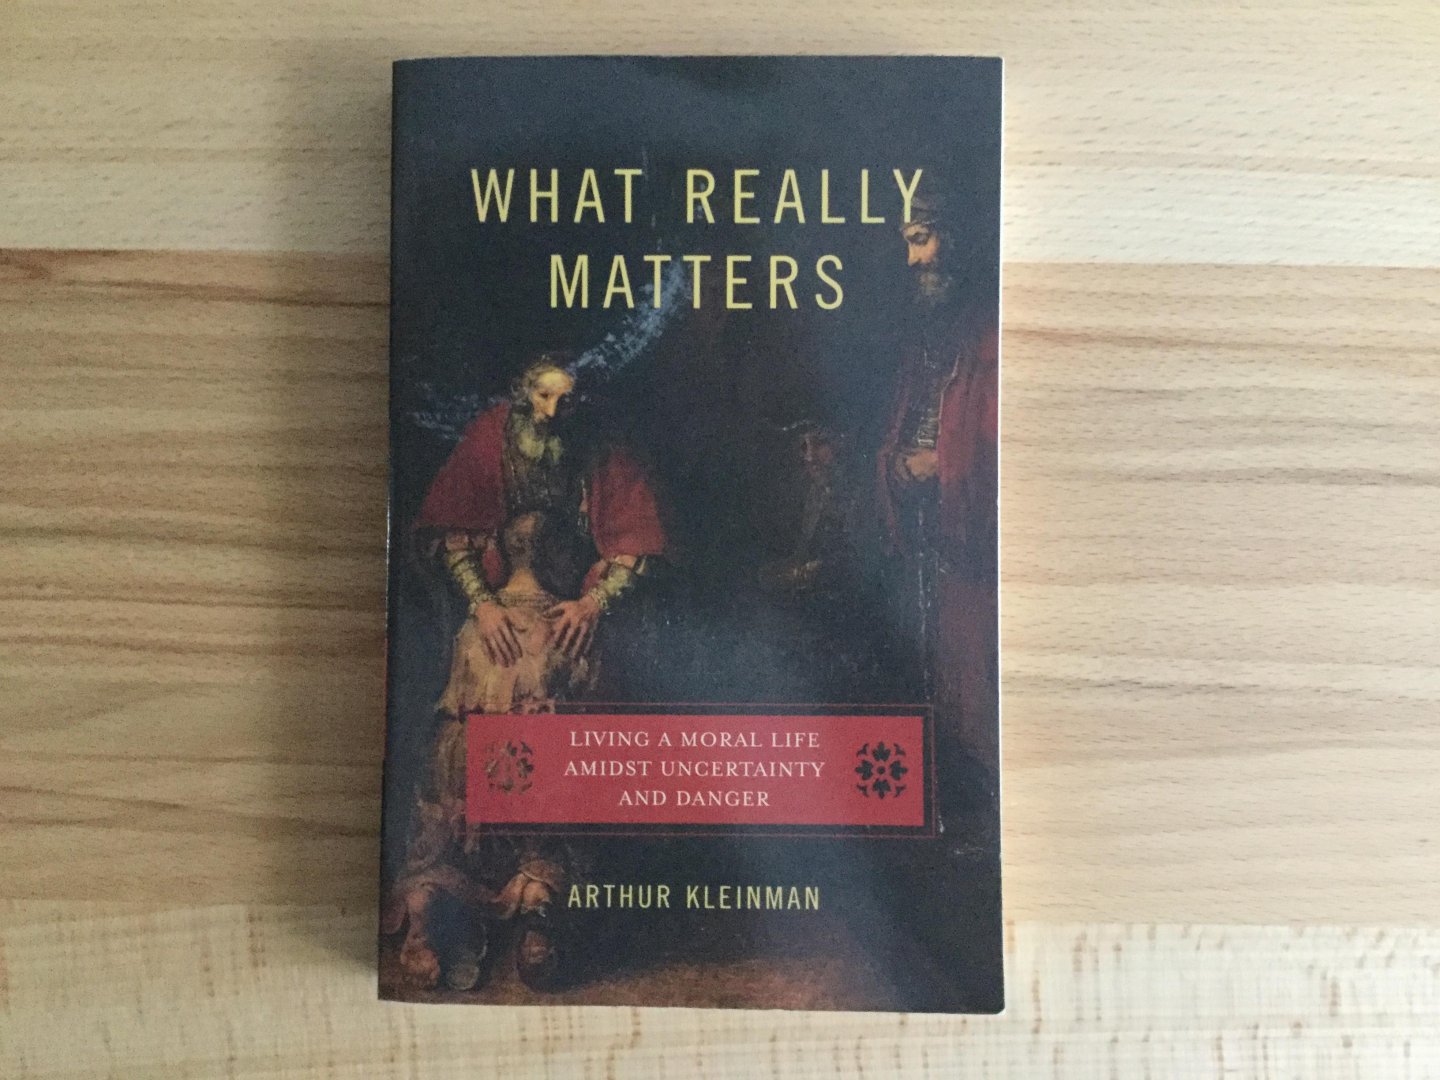 Arthur (Esther and Sidney Rabb Professor of Anthropology, Professor of Medical Anthropology, and Professor of Psychiatry, Faculty of Medicine, Harvard Medical School, Harvard University) Kleinman - What Really Matters / Living a Moral Life Amidst Uncertainty and Danger